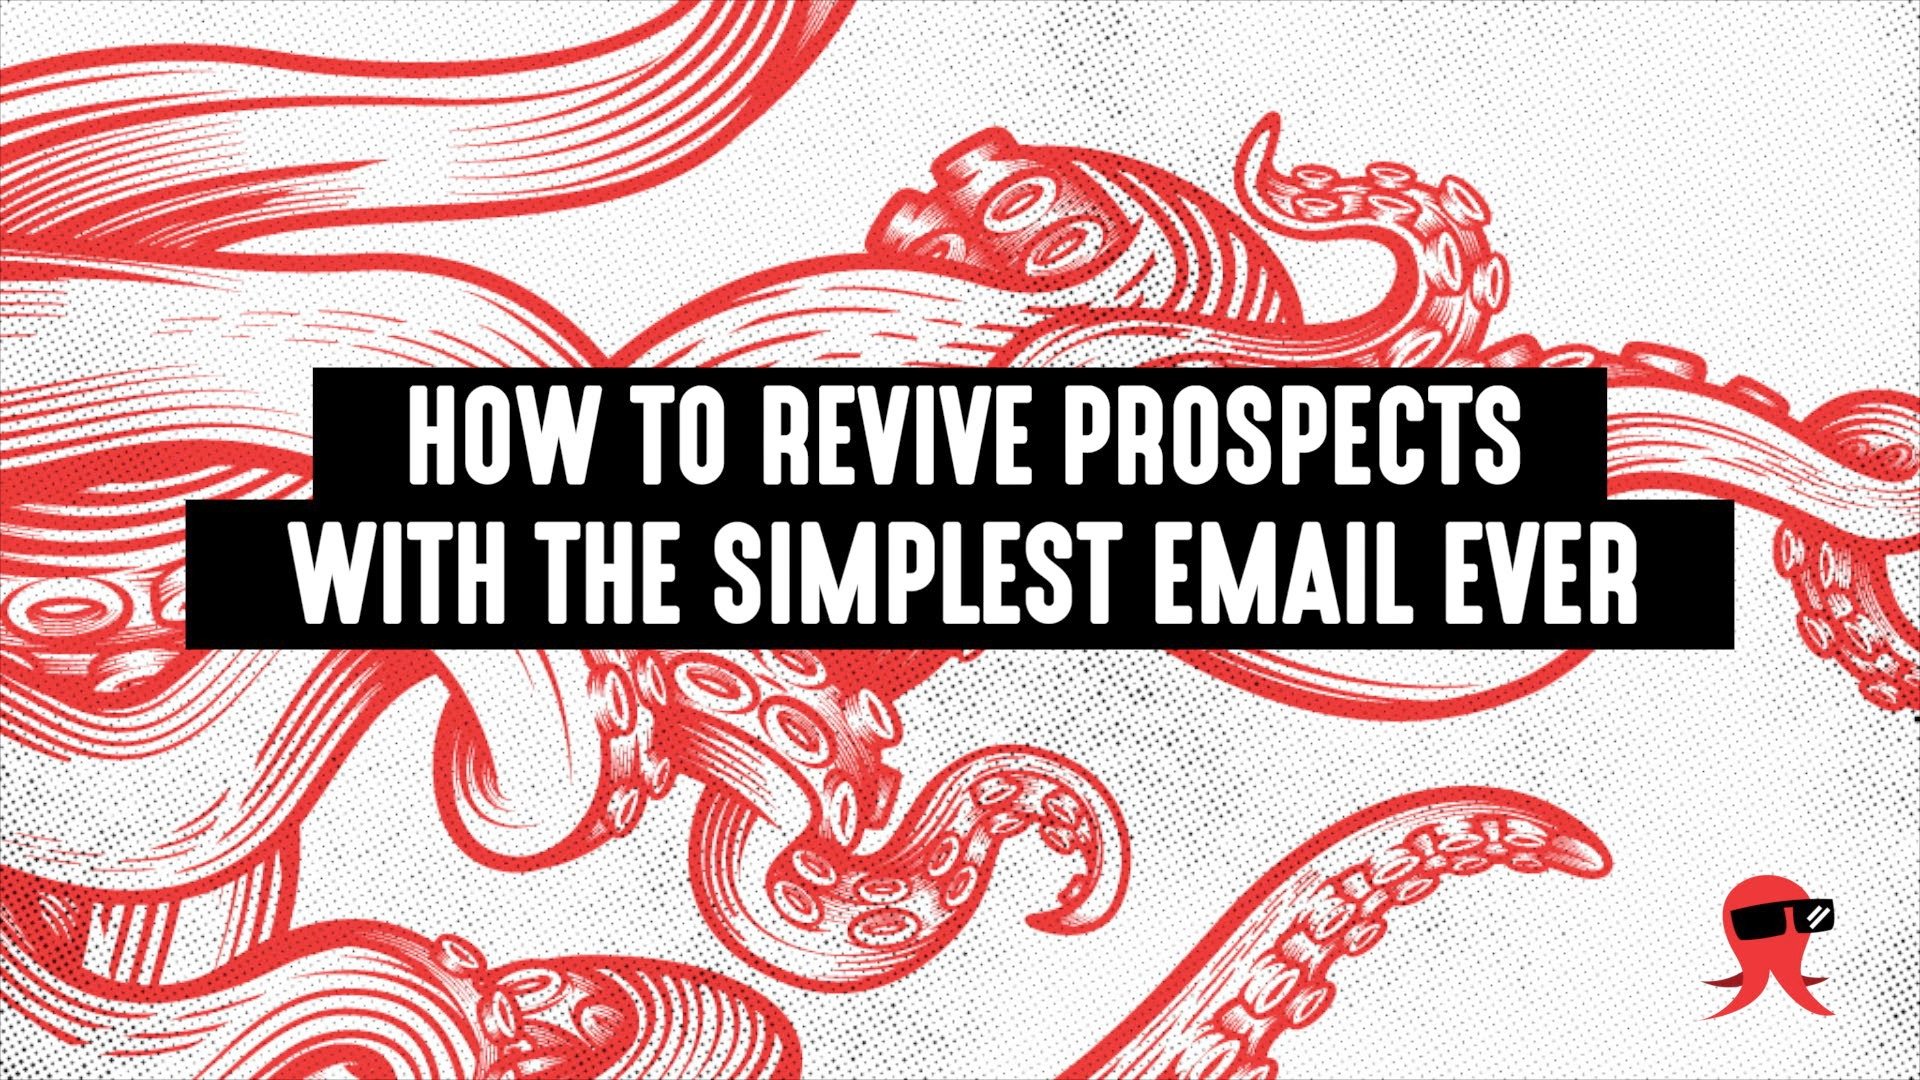 How-to-Revive-Prospects-With-the-Simplest-Email-Ever